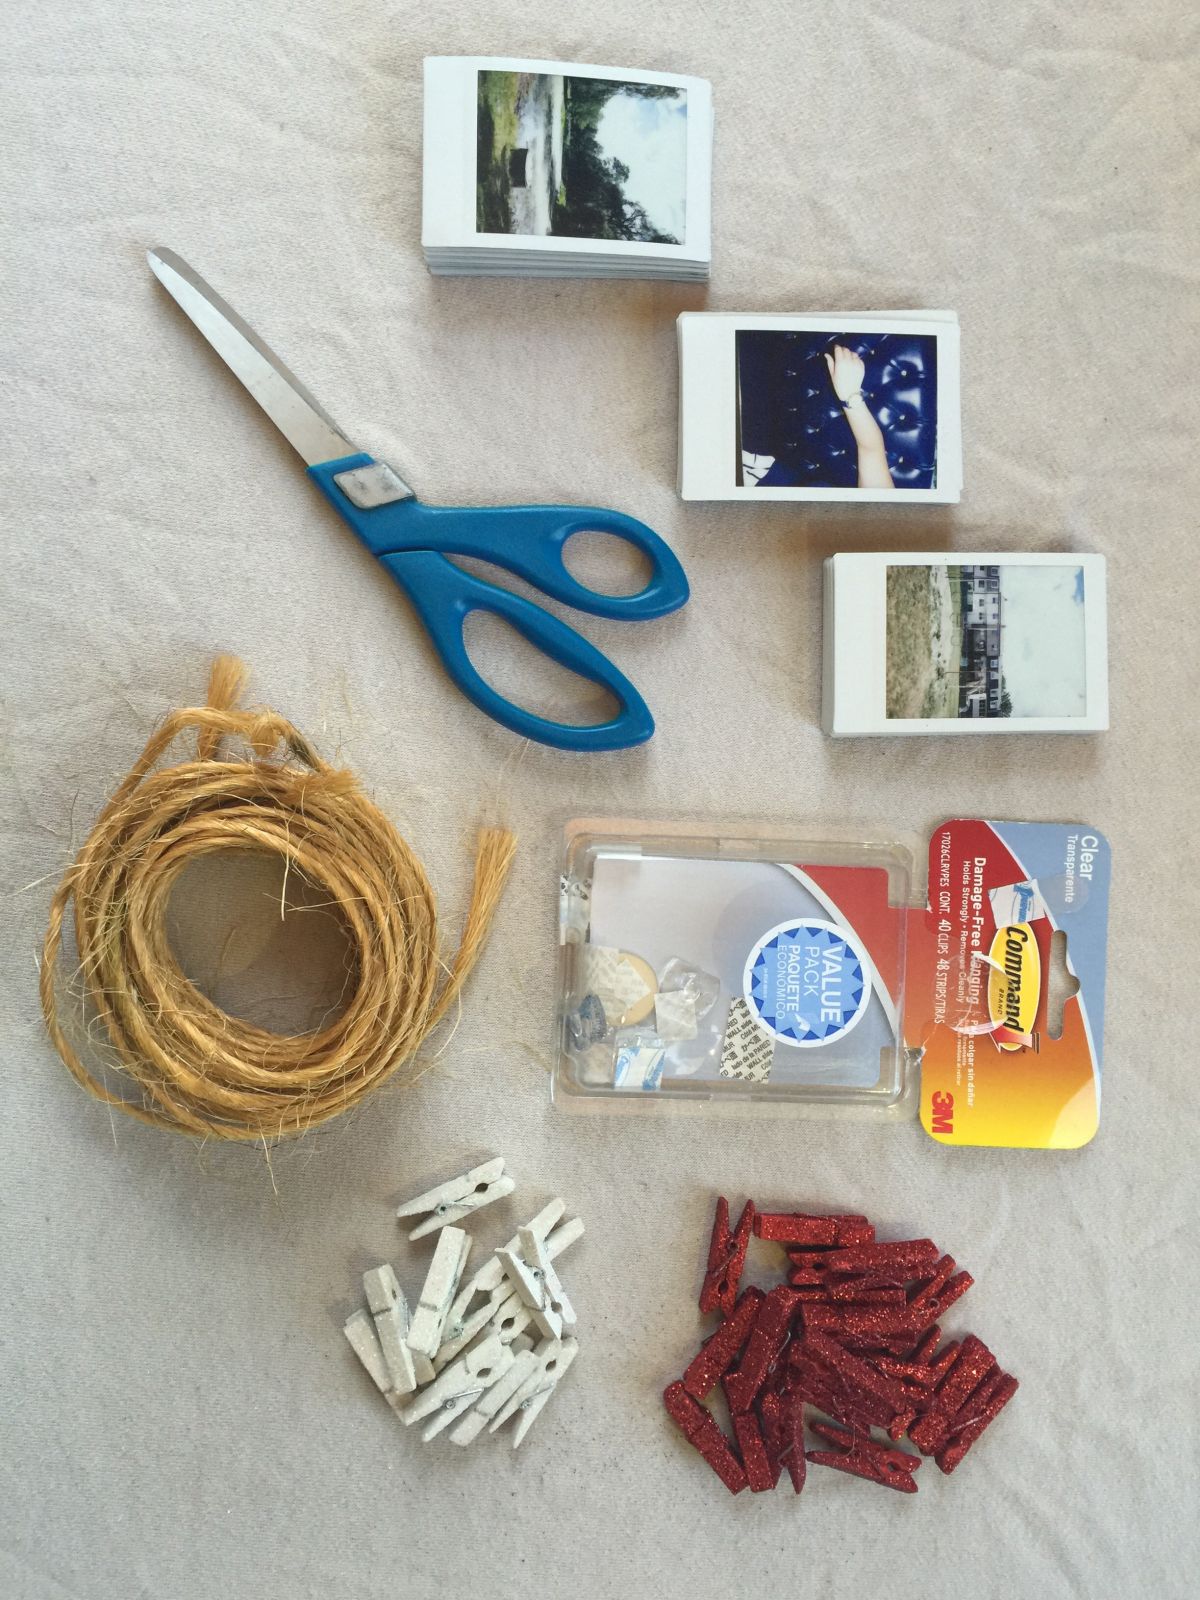 Materials to hang polaroid pictures with string